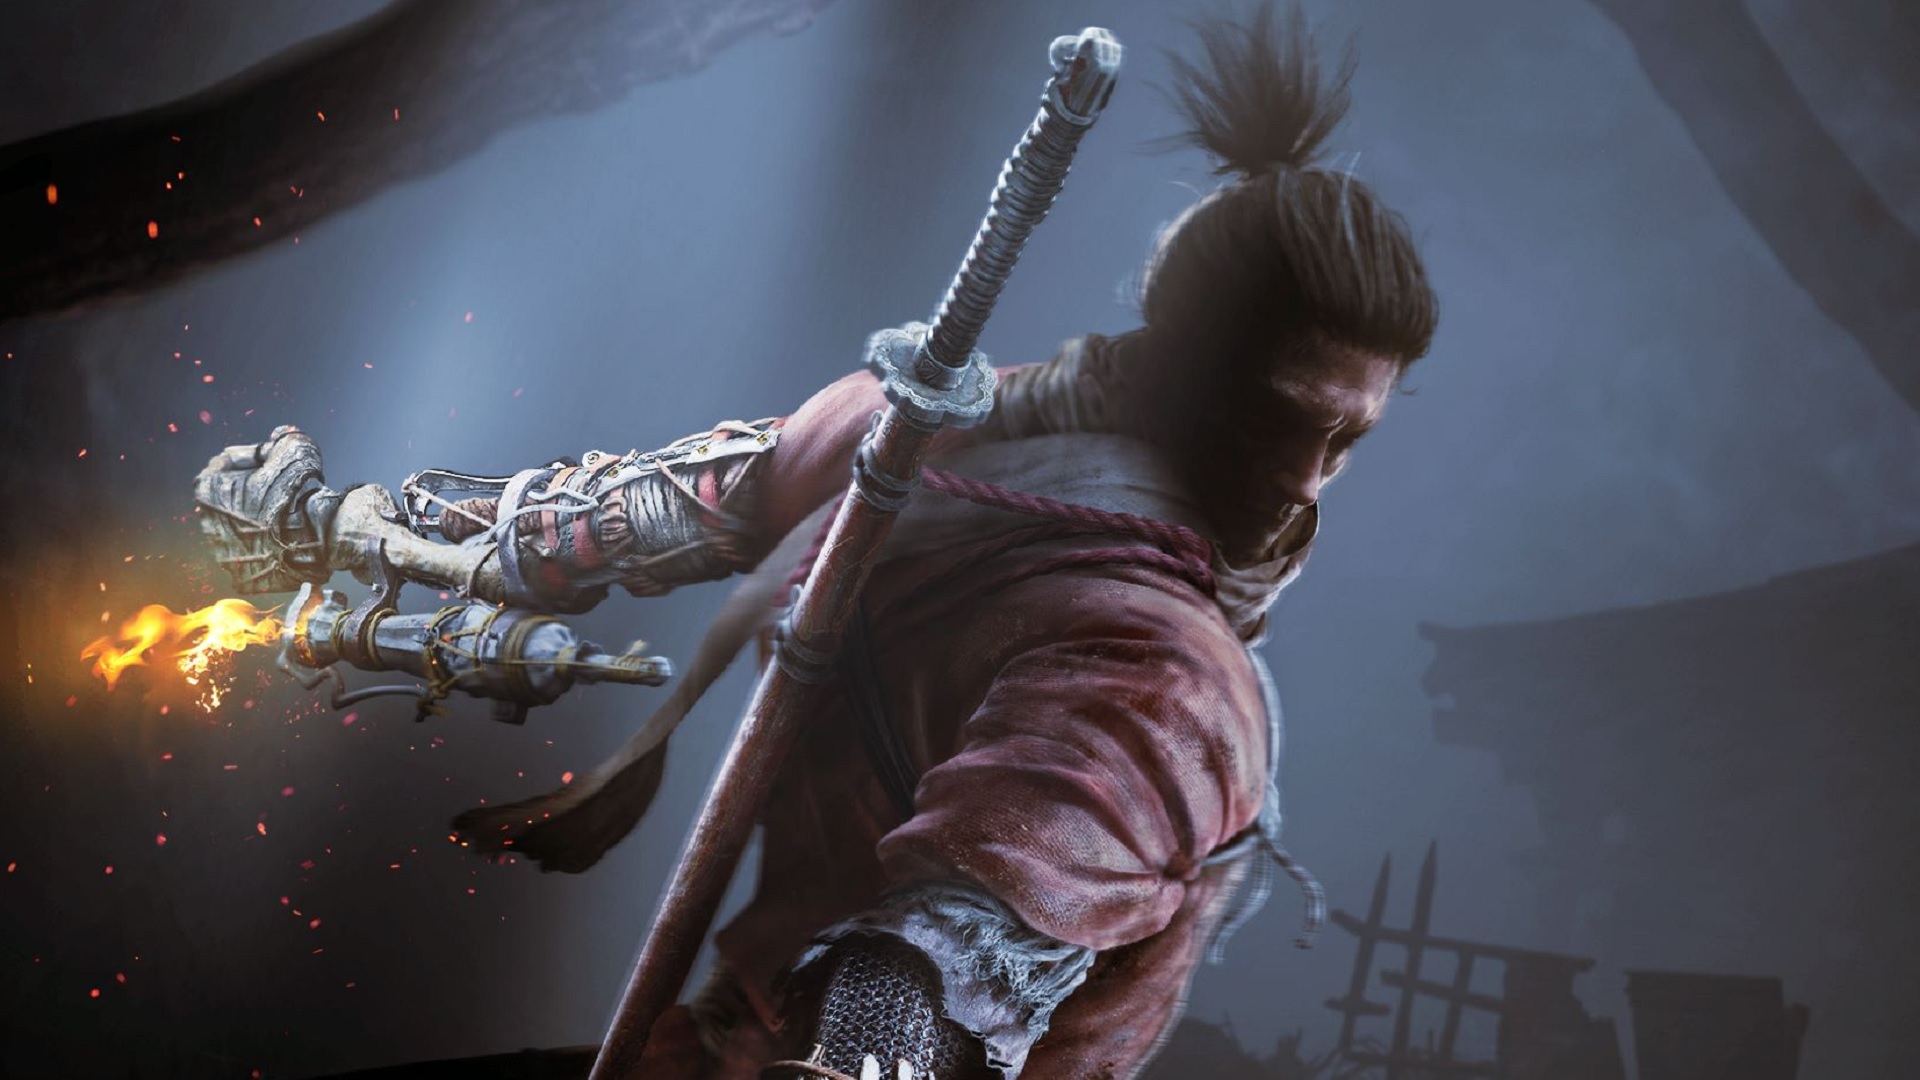 Ghost of Tsushima System Requirements